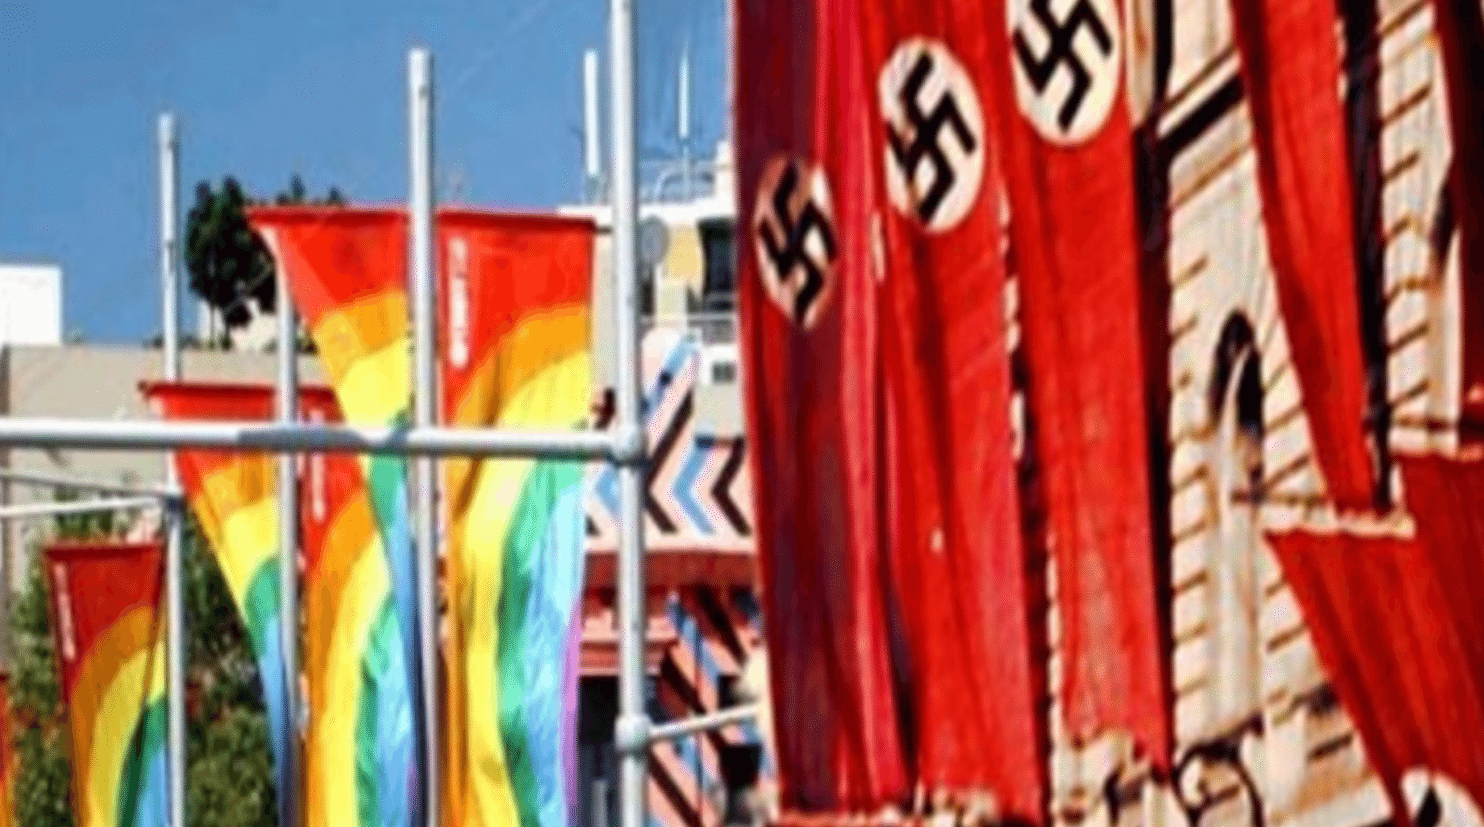 Flyers comparing gay people to Nazis have been distributed in Canberra and Adelaide